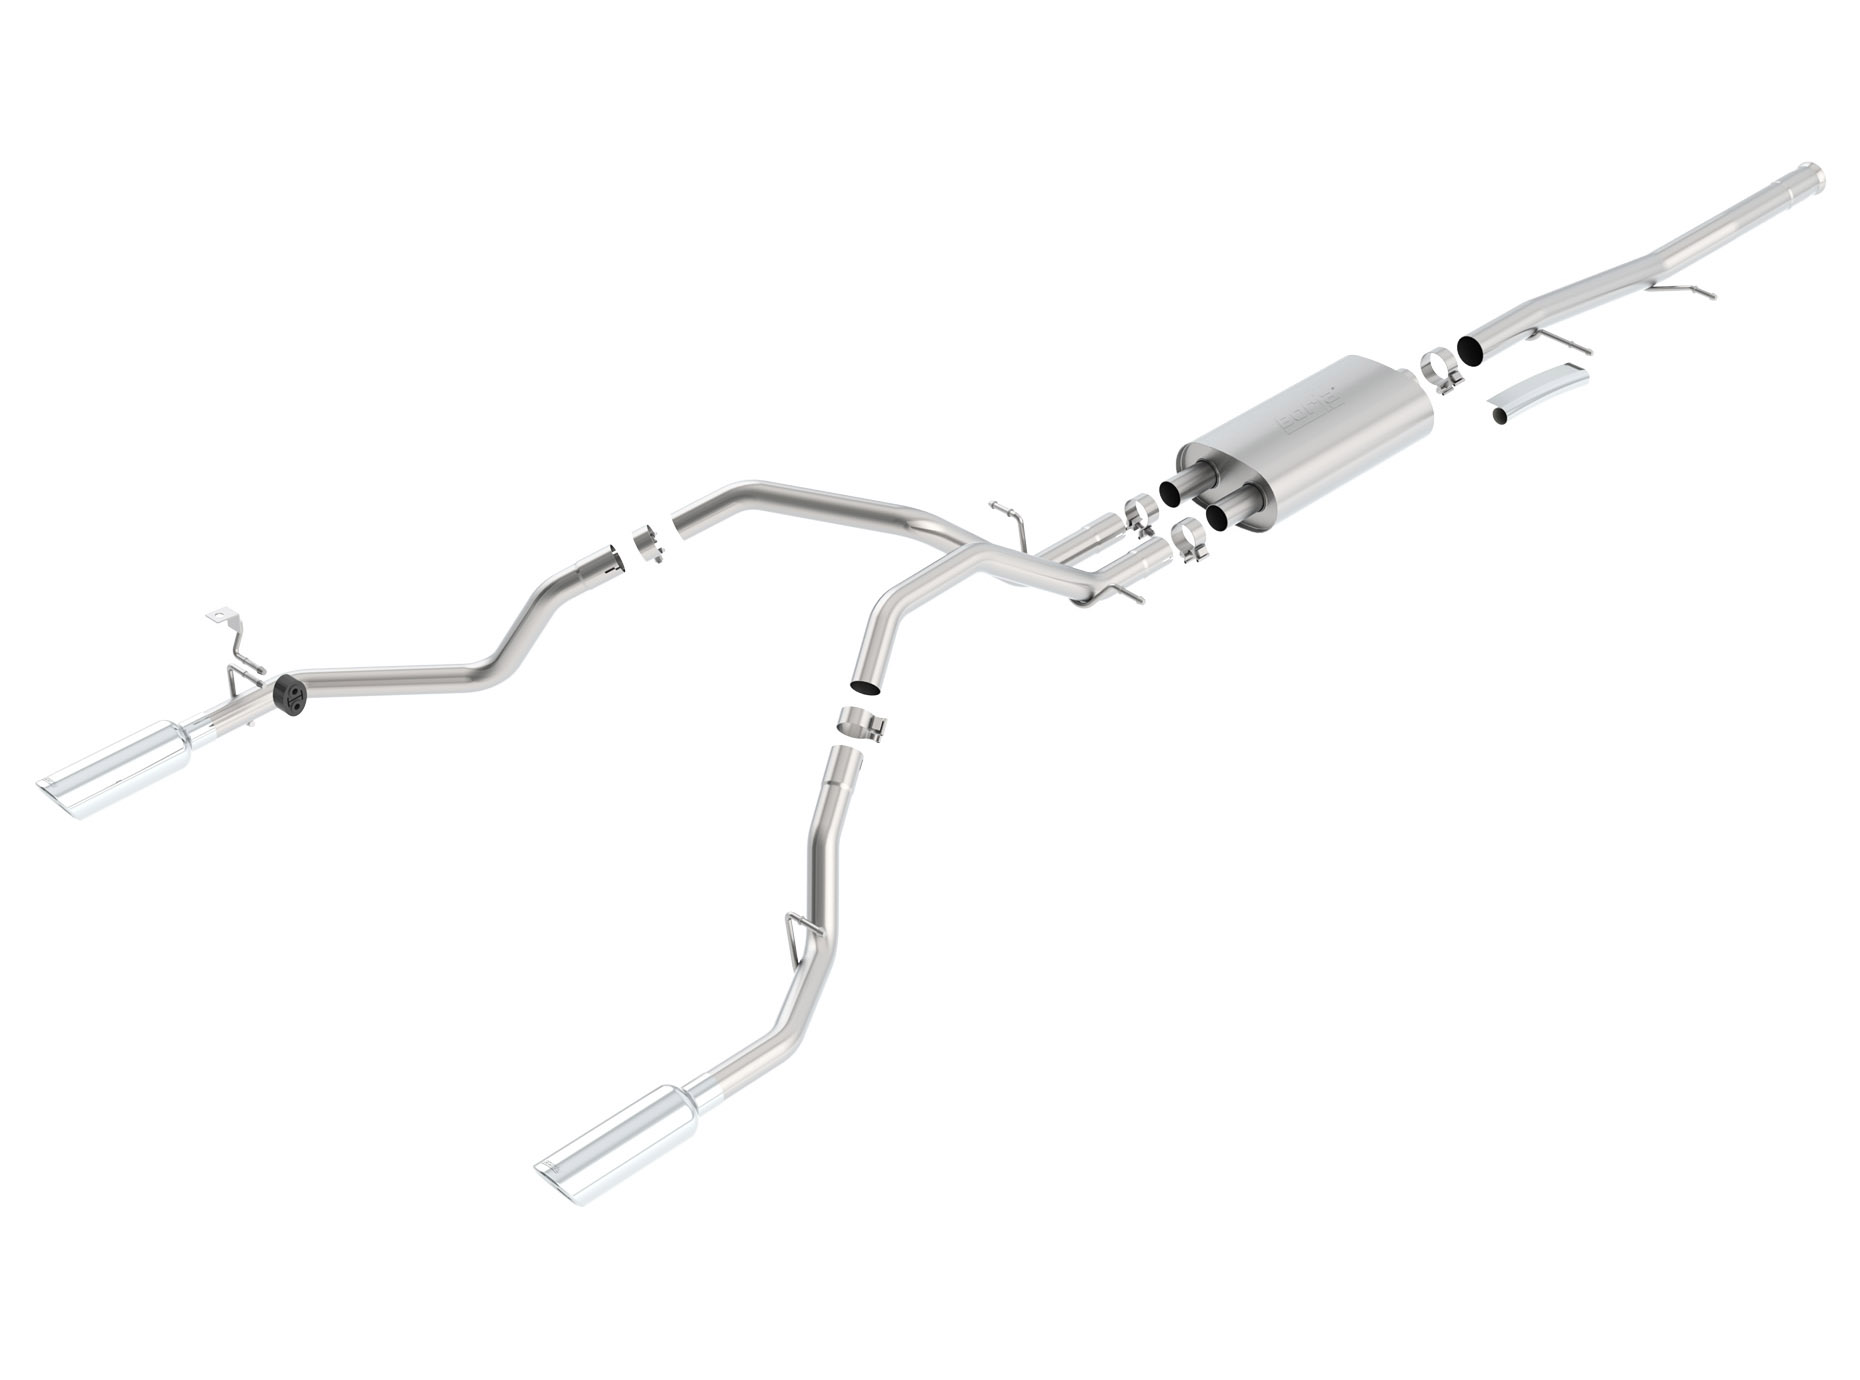 2009-2013 Chevy/GMC 1500 Borla S-Type Catback Exhaust System w/Rear Exit Tips - Ext. Cab/Std. Box & Crew Cab/Short Bed